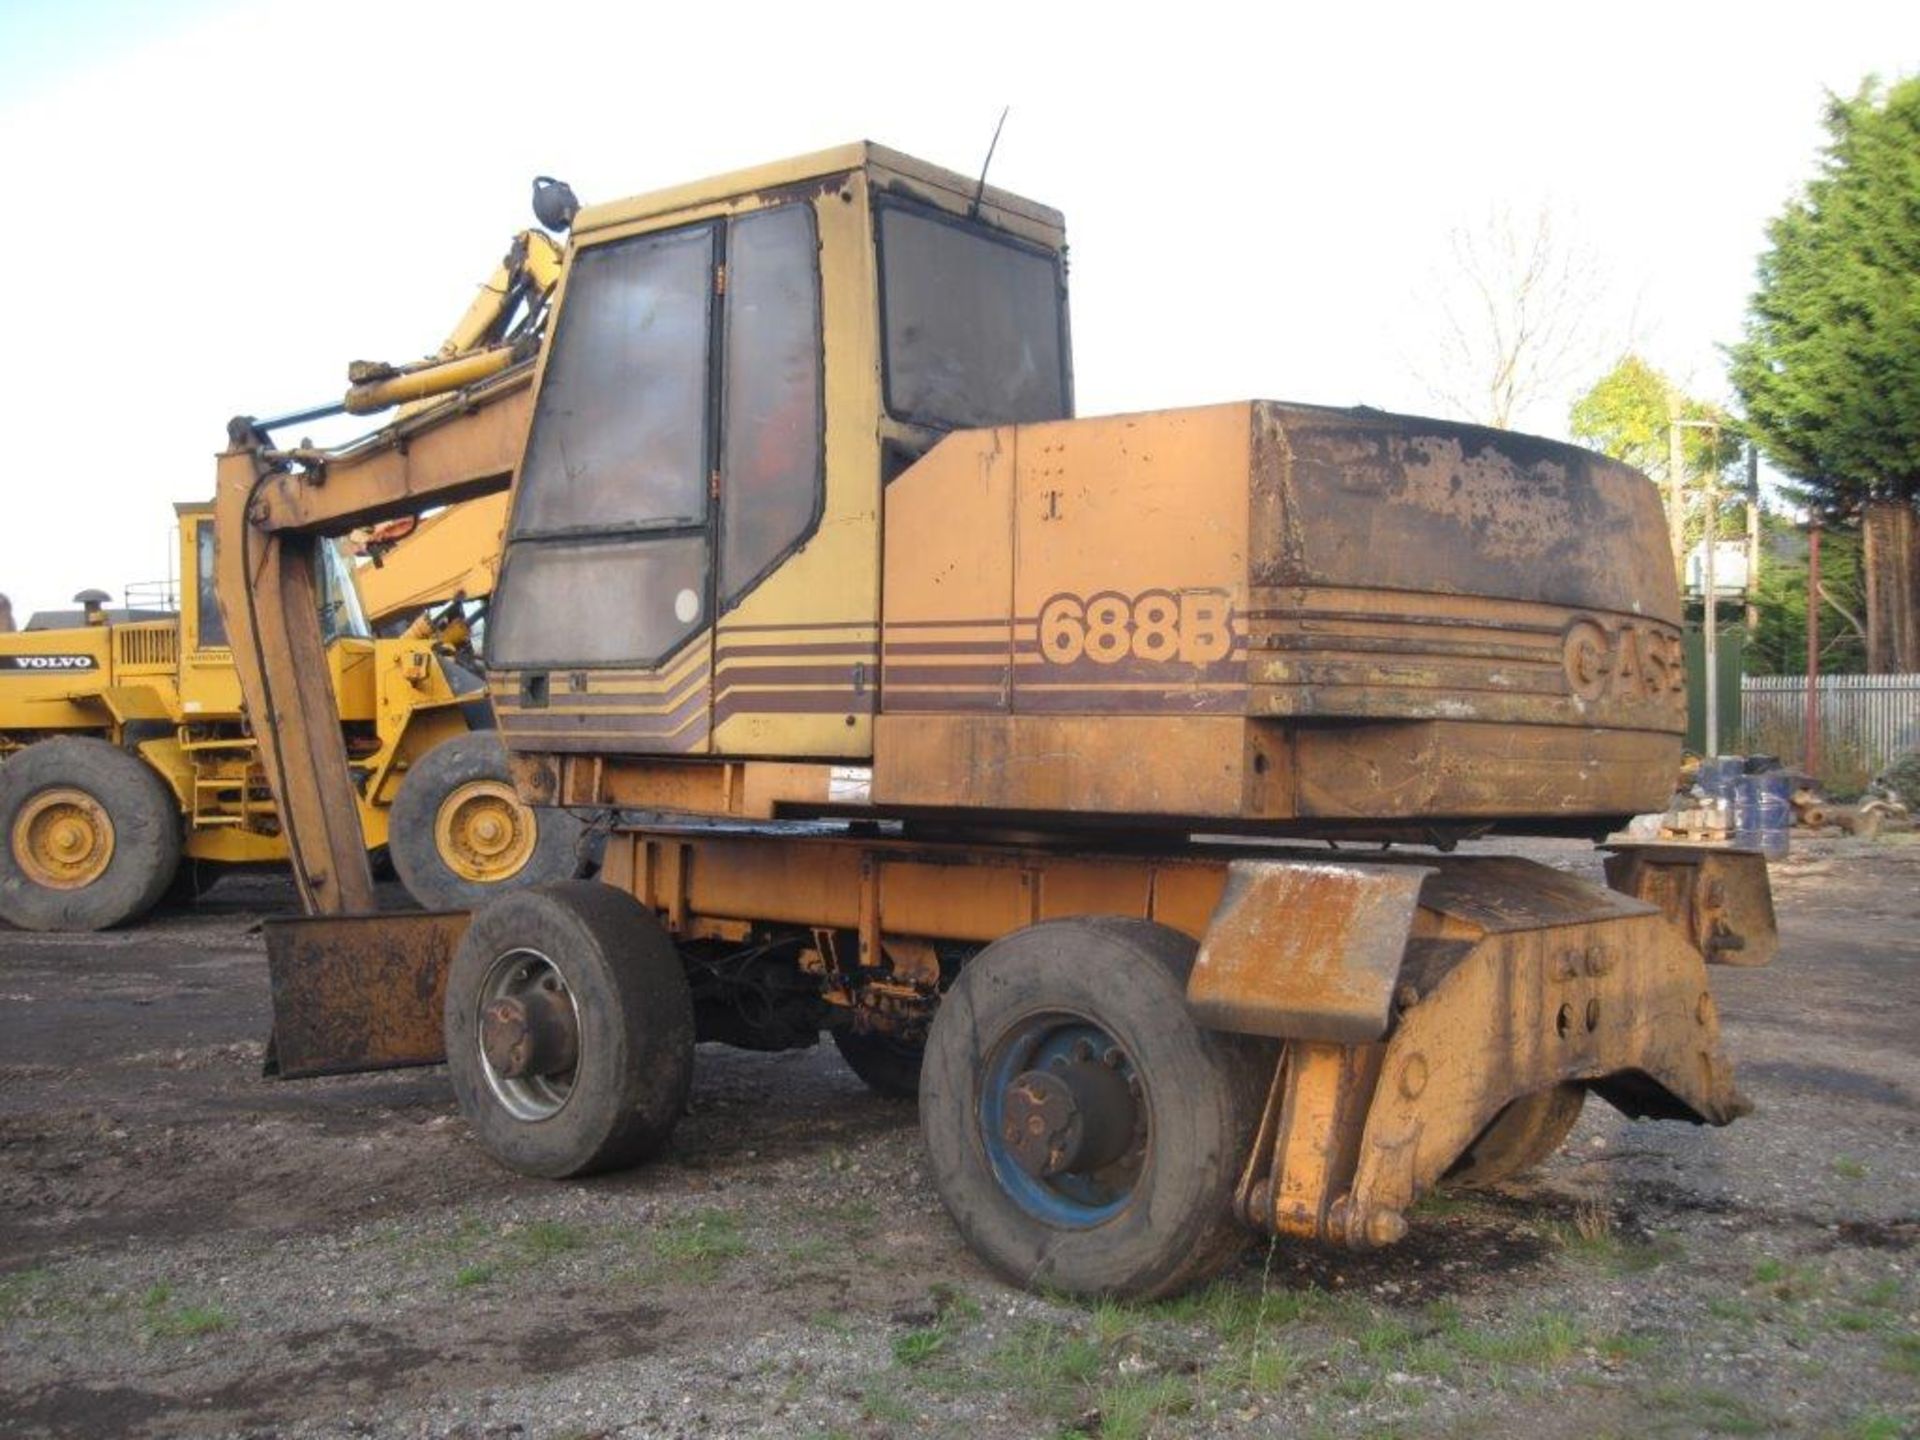 Case 688B Excavator on Wheels Direct from work